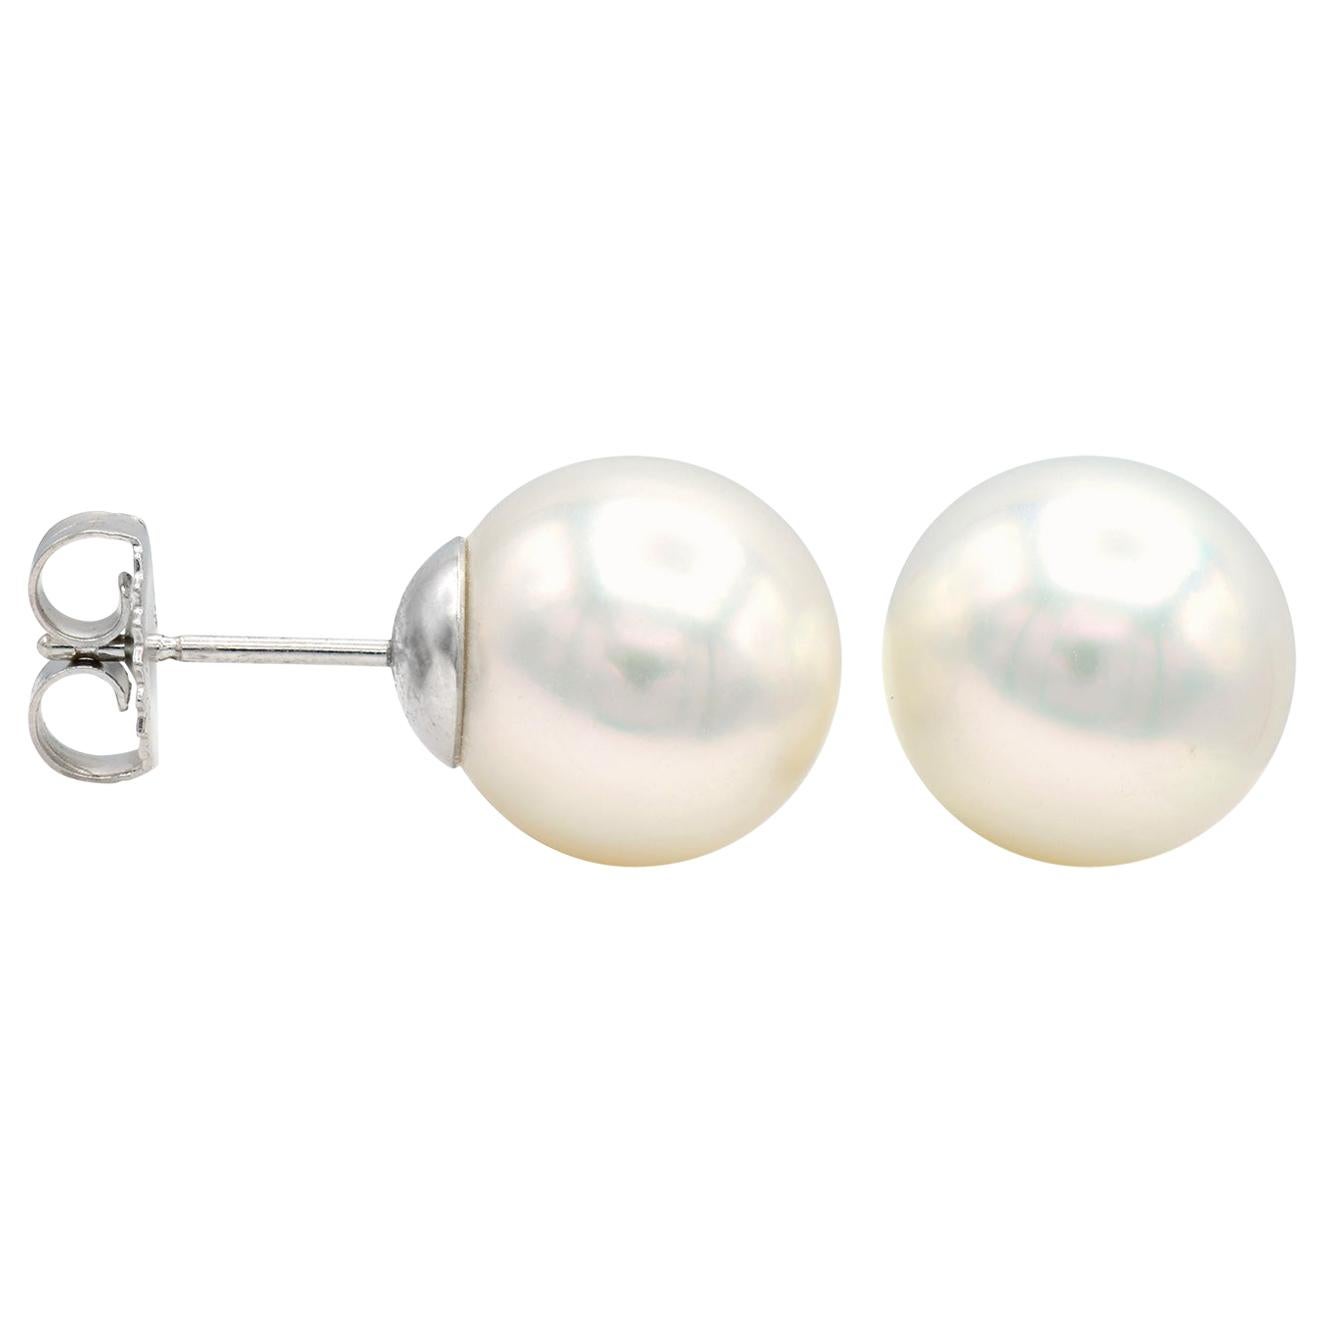 11.5-12mm South Sea Pearl Stud Earrings with 14 Karat White Gold Posts and Backs For Sale